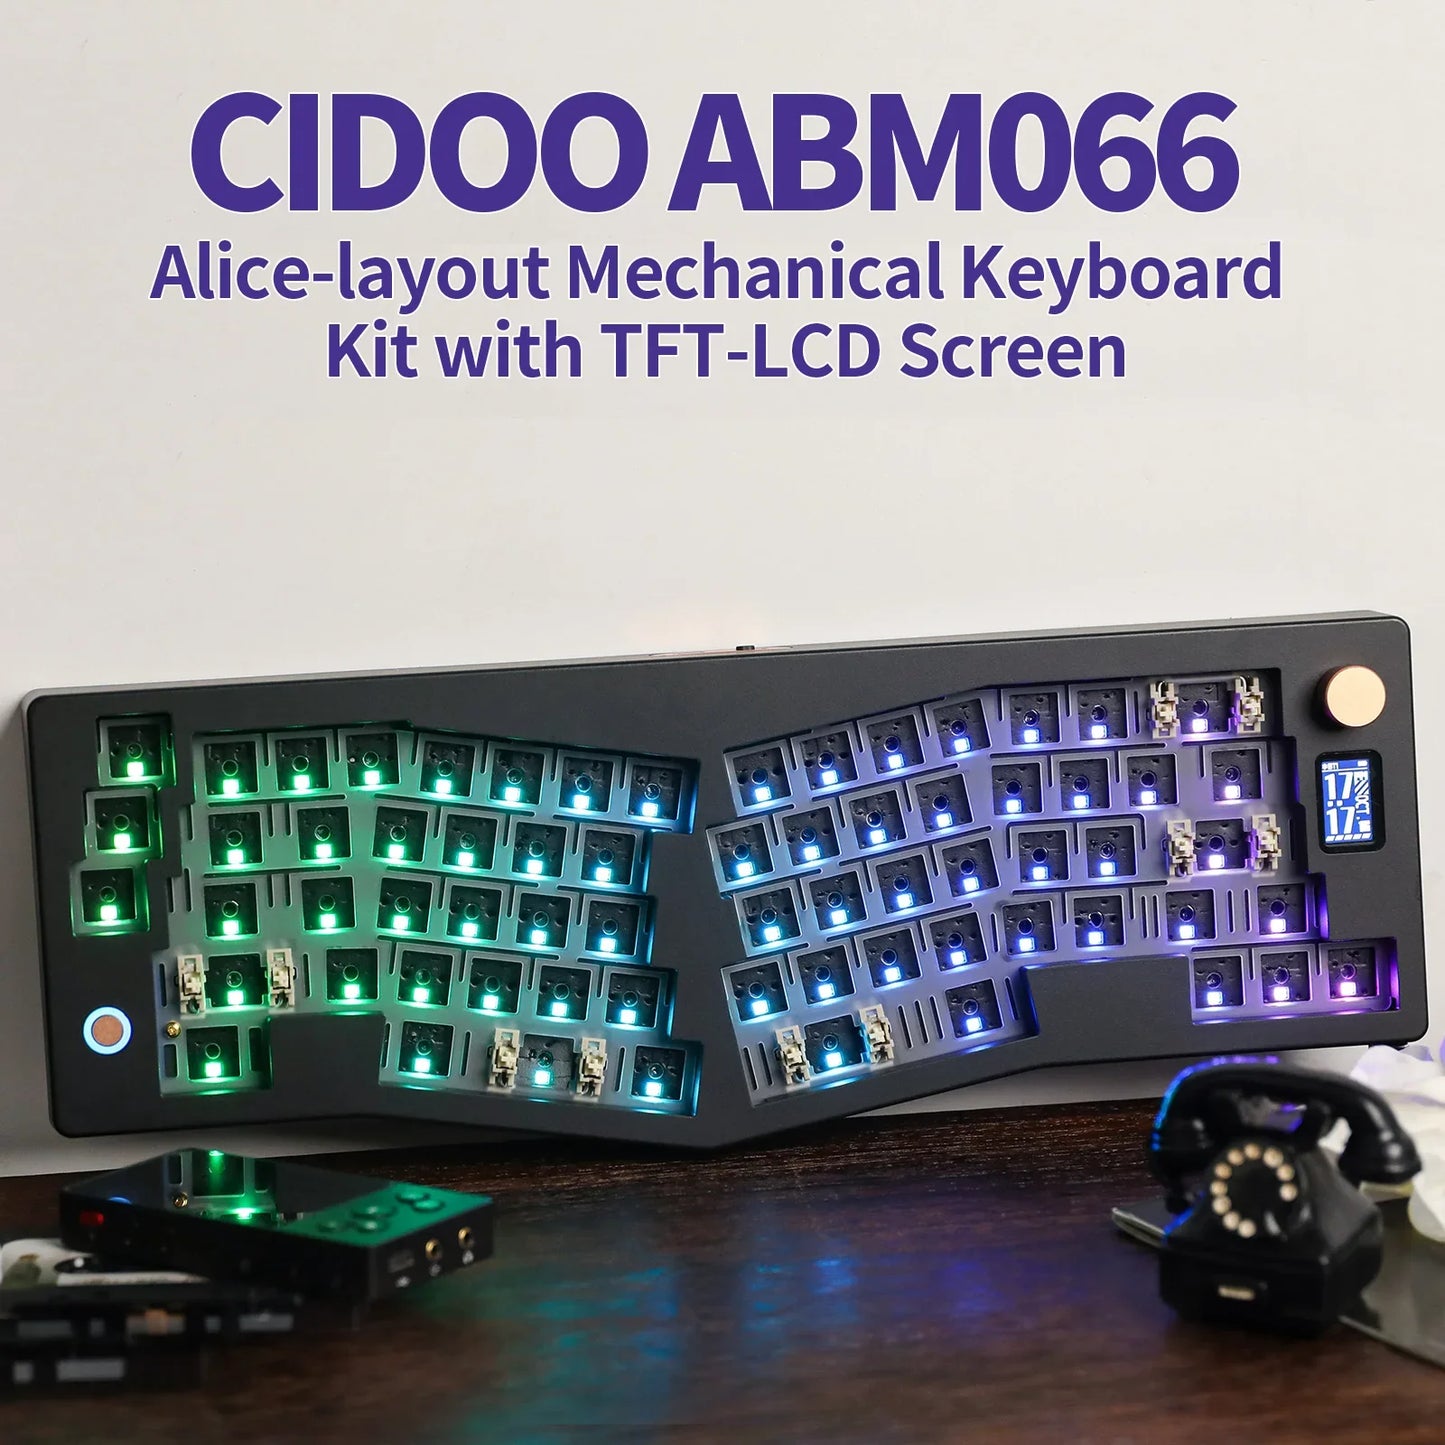 CIDOO ABM066 Barebones RGB Kit Alice-layout  Hot Swappable Wireless/Wired for Win/Mac VIA-programmable